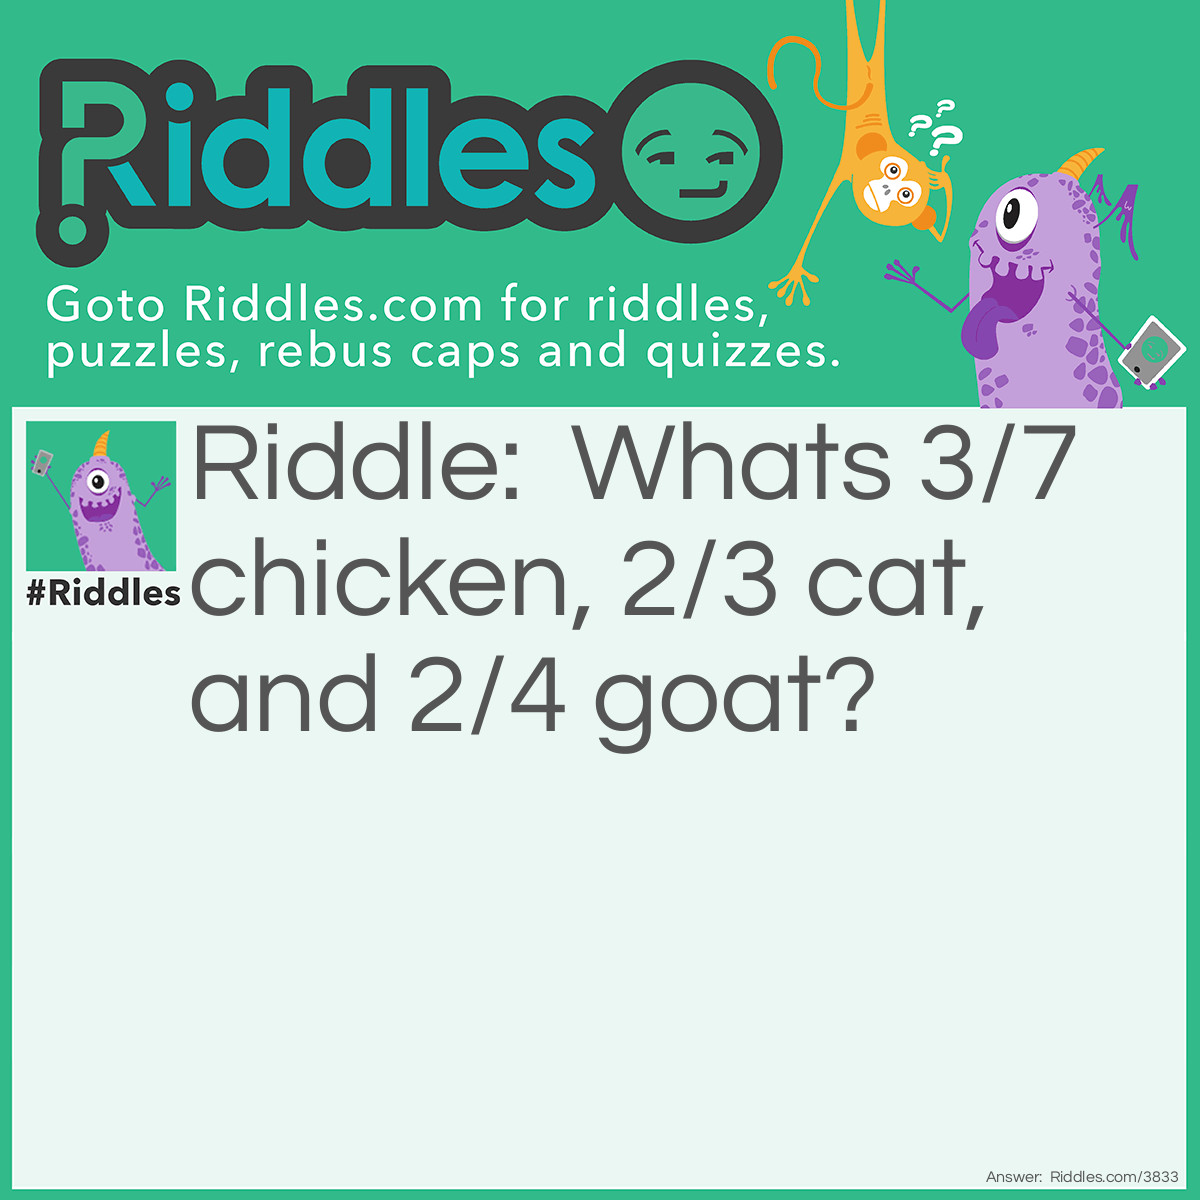 Riddle: What's 3/7 chicken, 2/3 cat, and 2/4 goat? Answer: Chicago. The first three words out of seven of chicken are CHI, the first two words out of 3 of cat are CA, and the first two words out of goat are GO. Therefore making, (CHI)(CA)(GO).